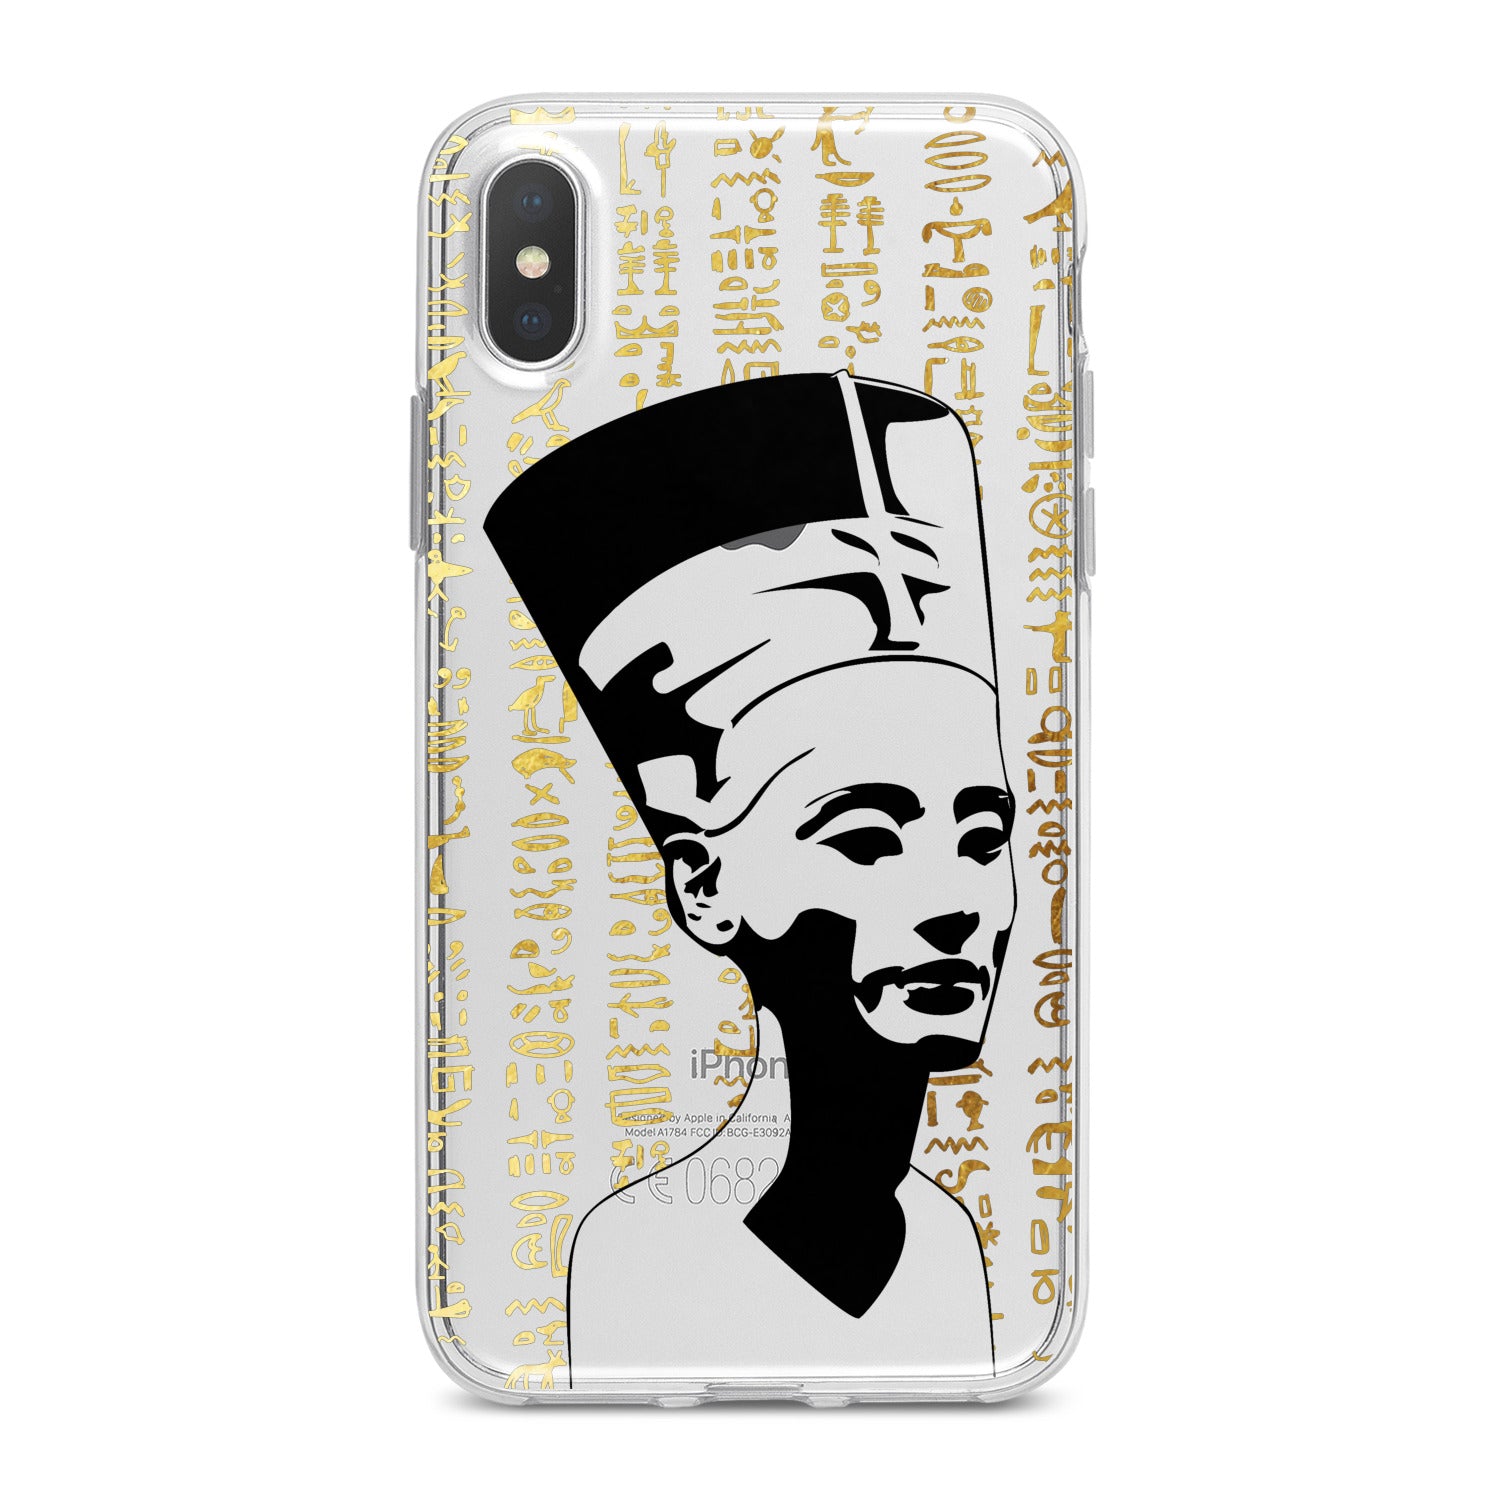 Lex Altern Nefertiti Queen Phone Case for your iPhone & Android phone.